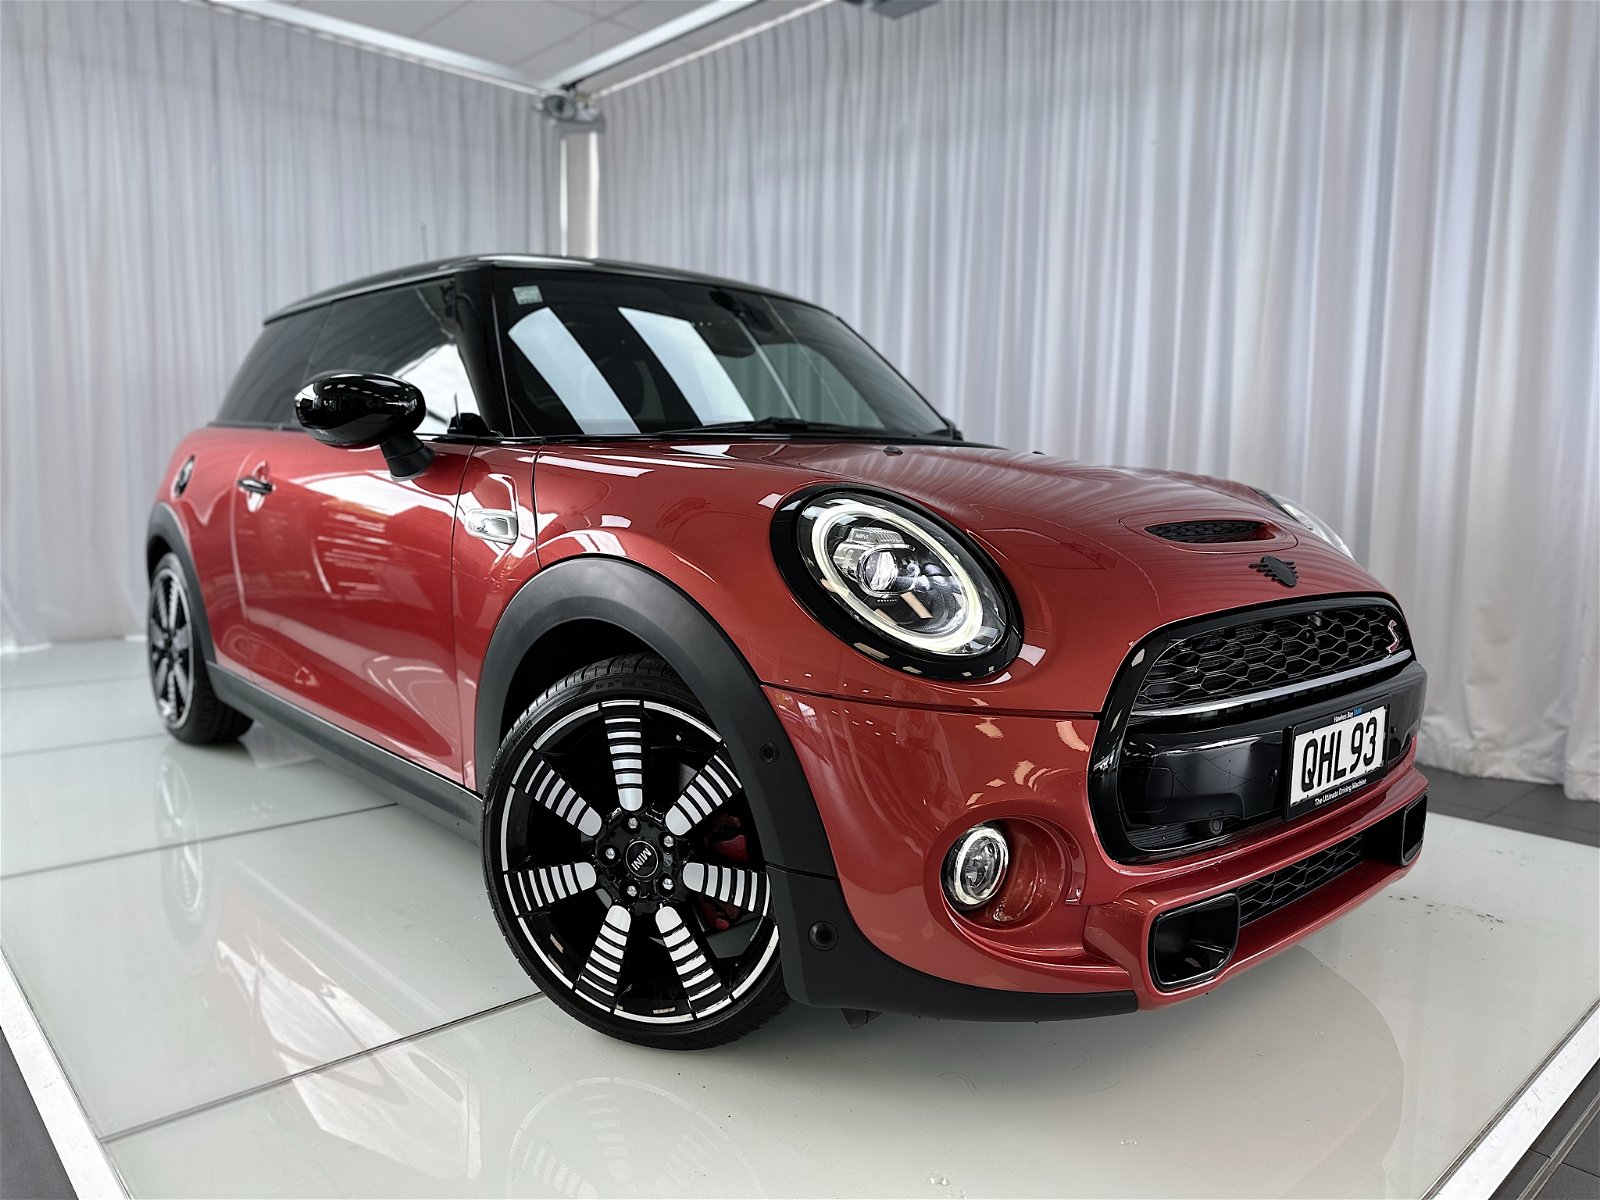 2020 MINI Cooper S Hatch ISR Limited Edition